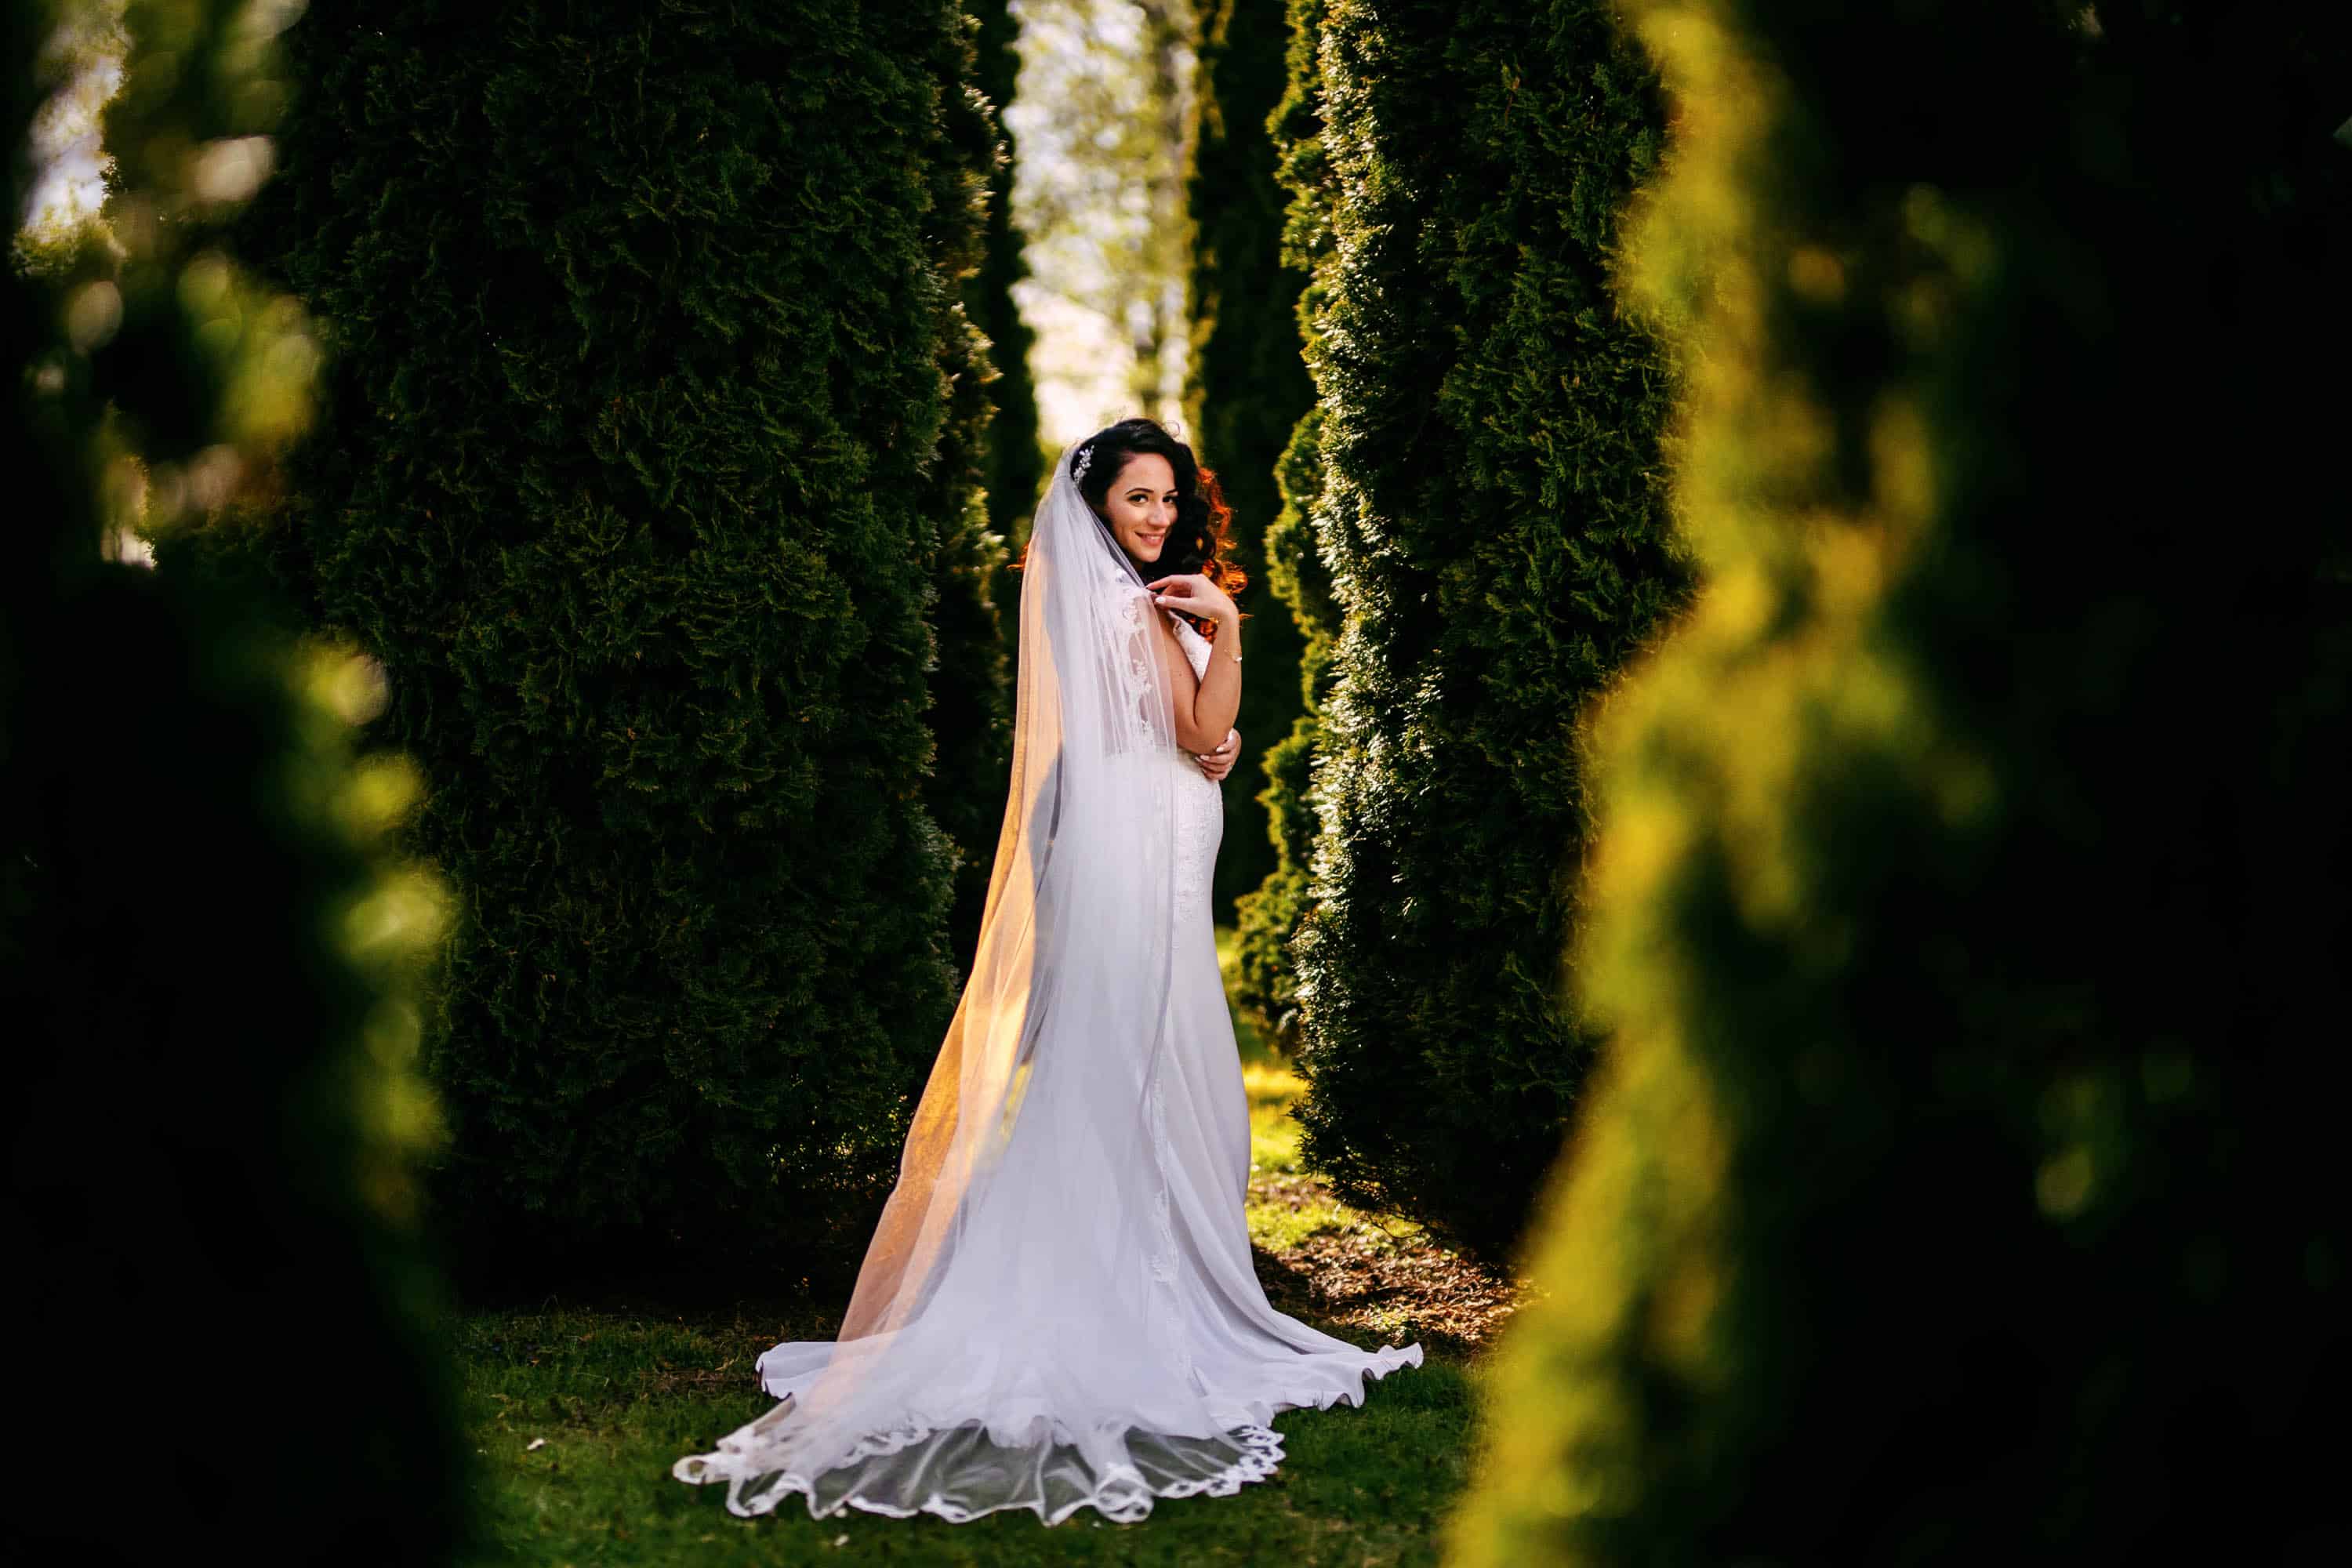 A bride posing in the middle of a forest.